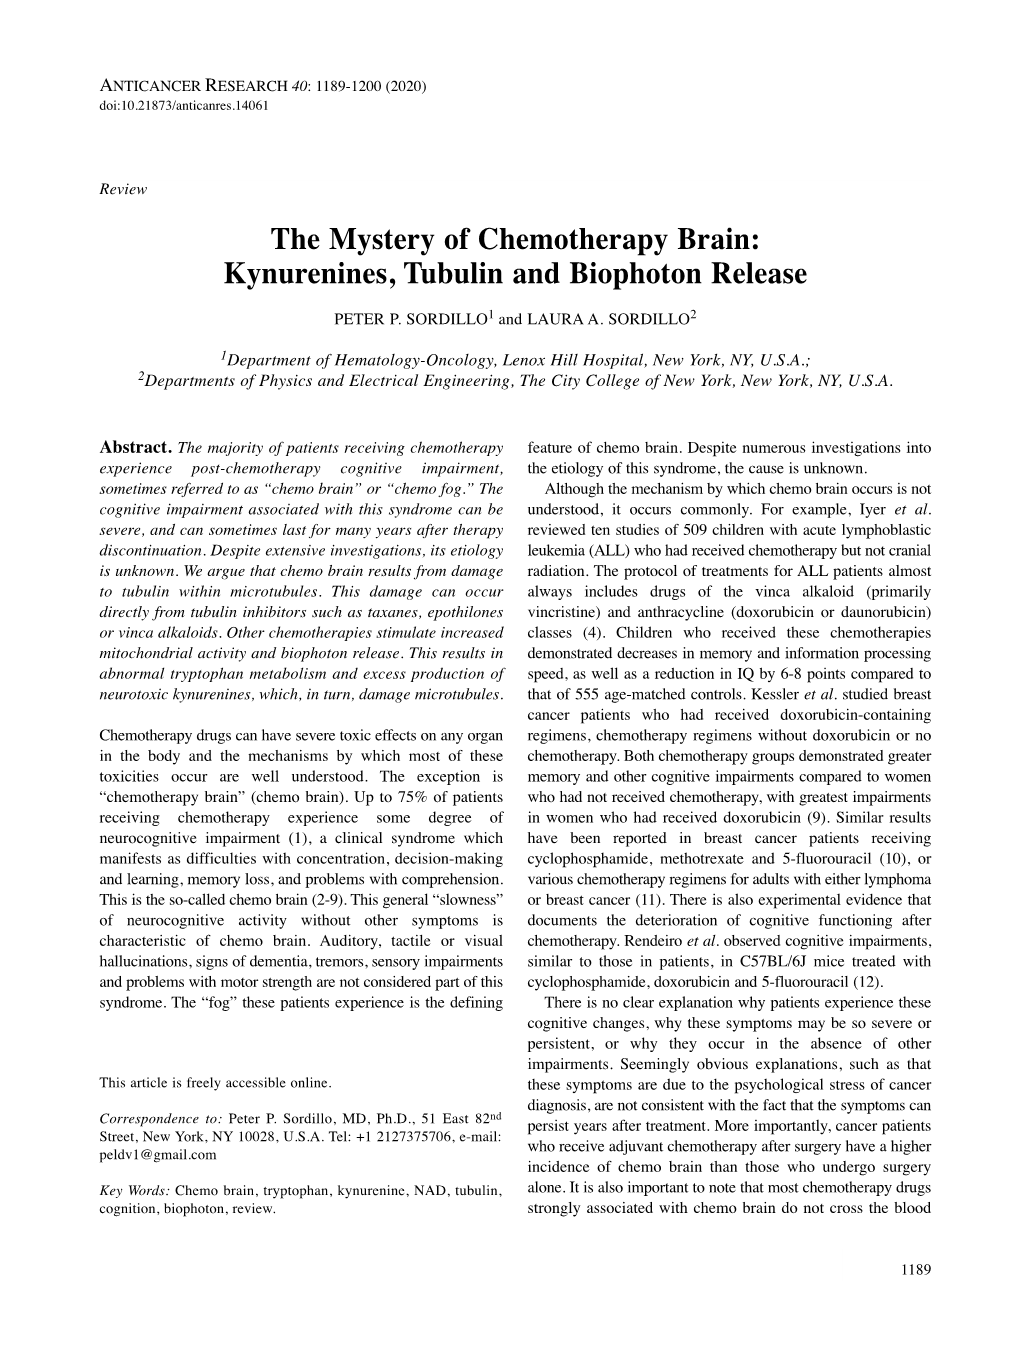 The Mystery of Chemotherapy Brain: Kynurenines, Tubulin and Biophoton Release PETER P